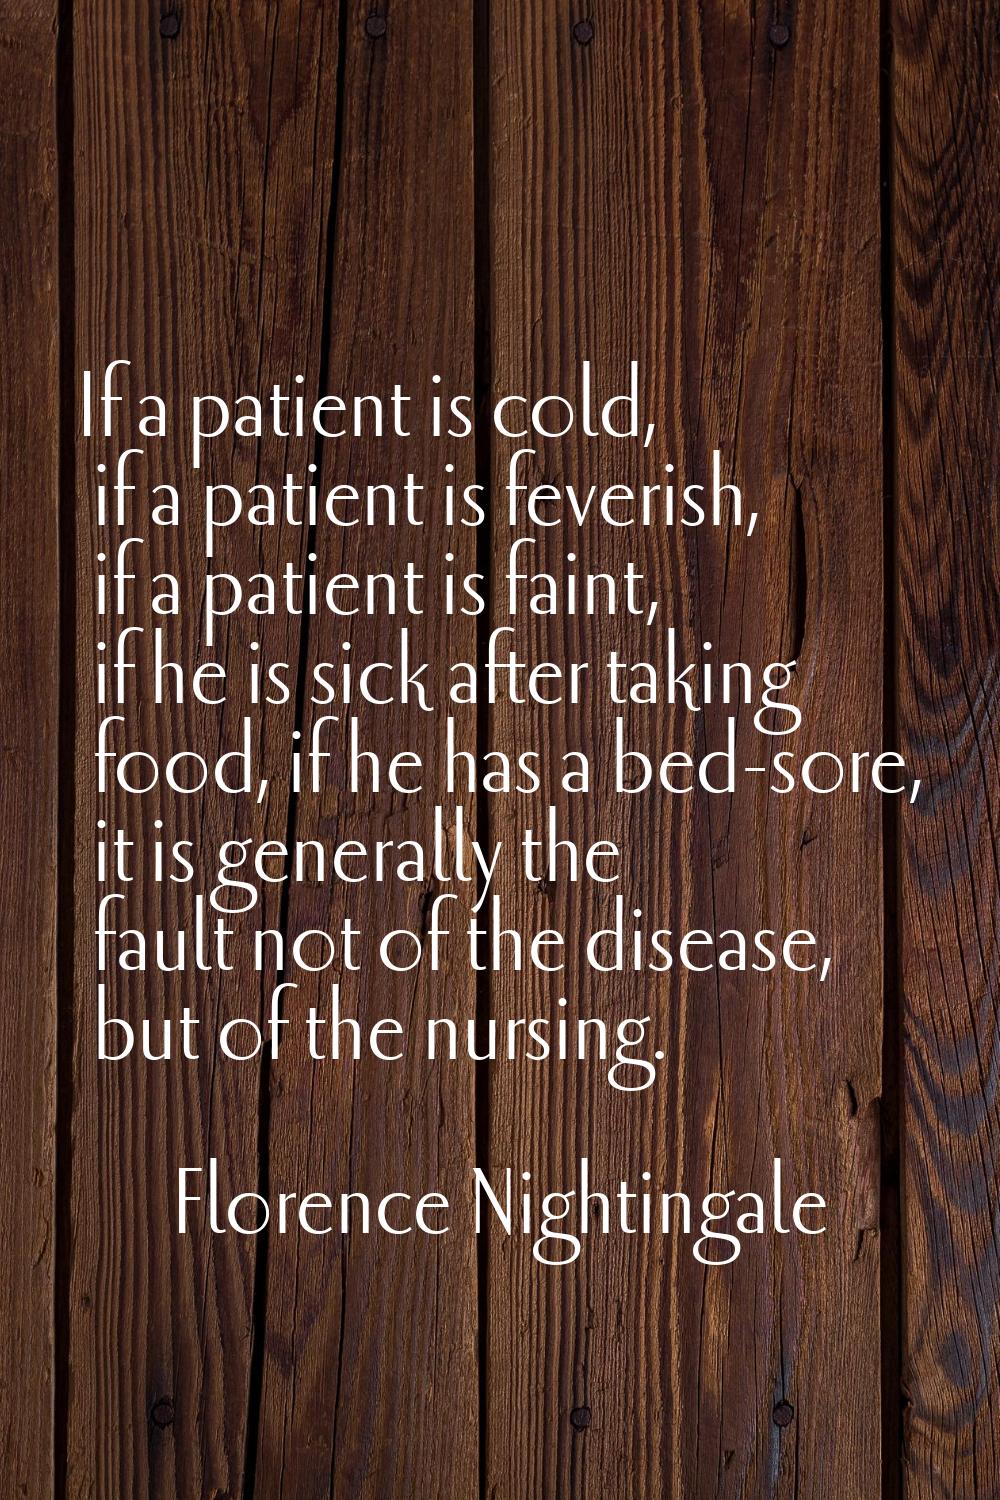 If a patient is cold, if a patient is feverish, if a patient is faint, if he is sick after taking f